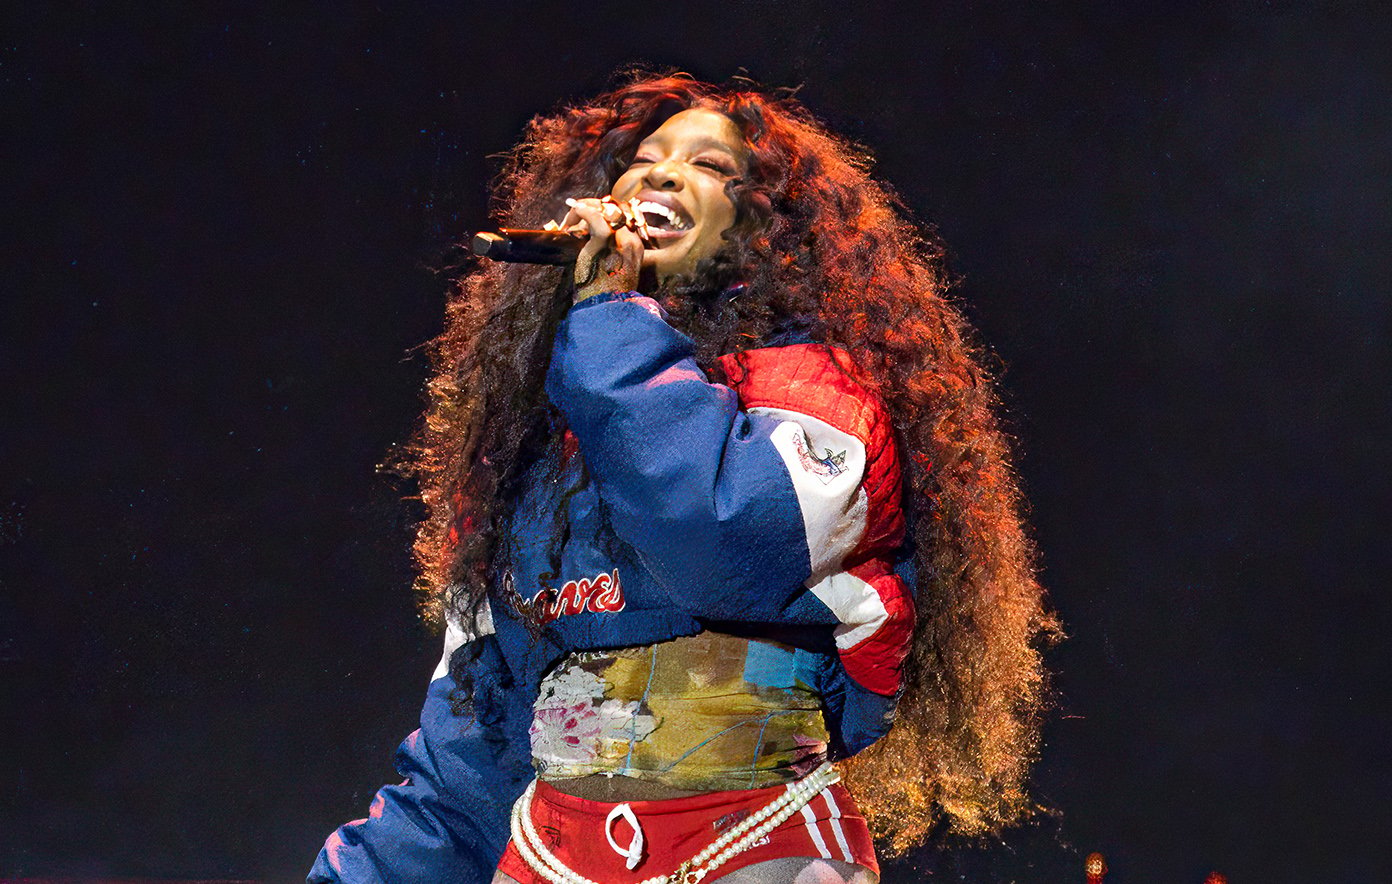 SZA teases new album at BST Hyde Park headline set with song snippet